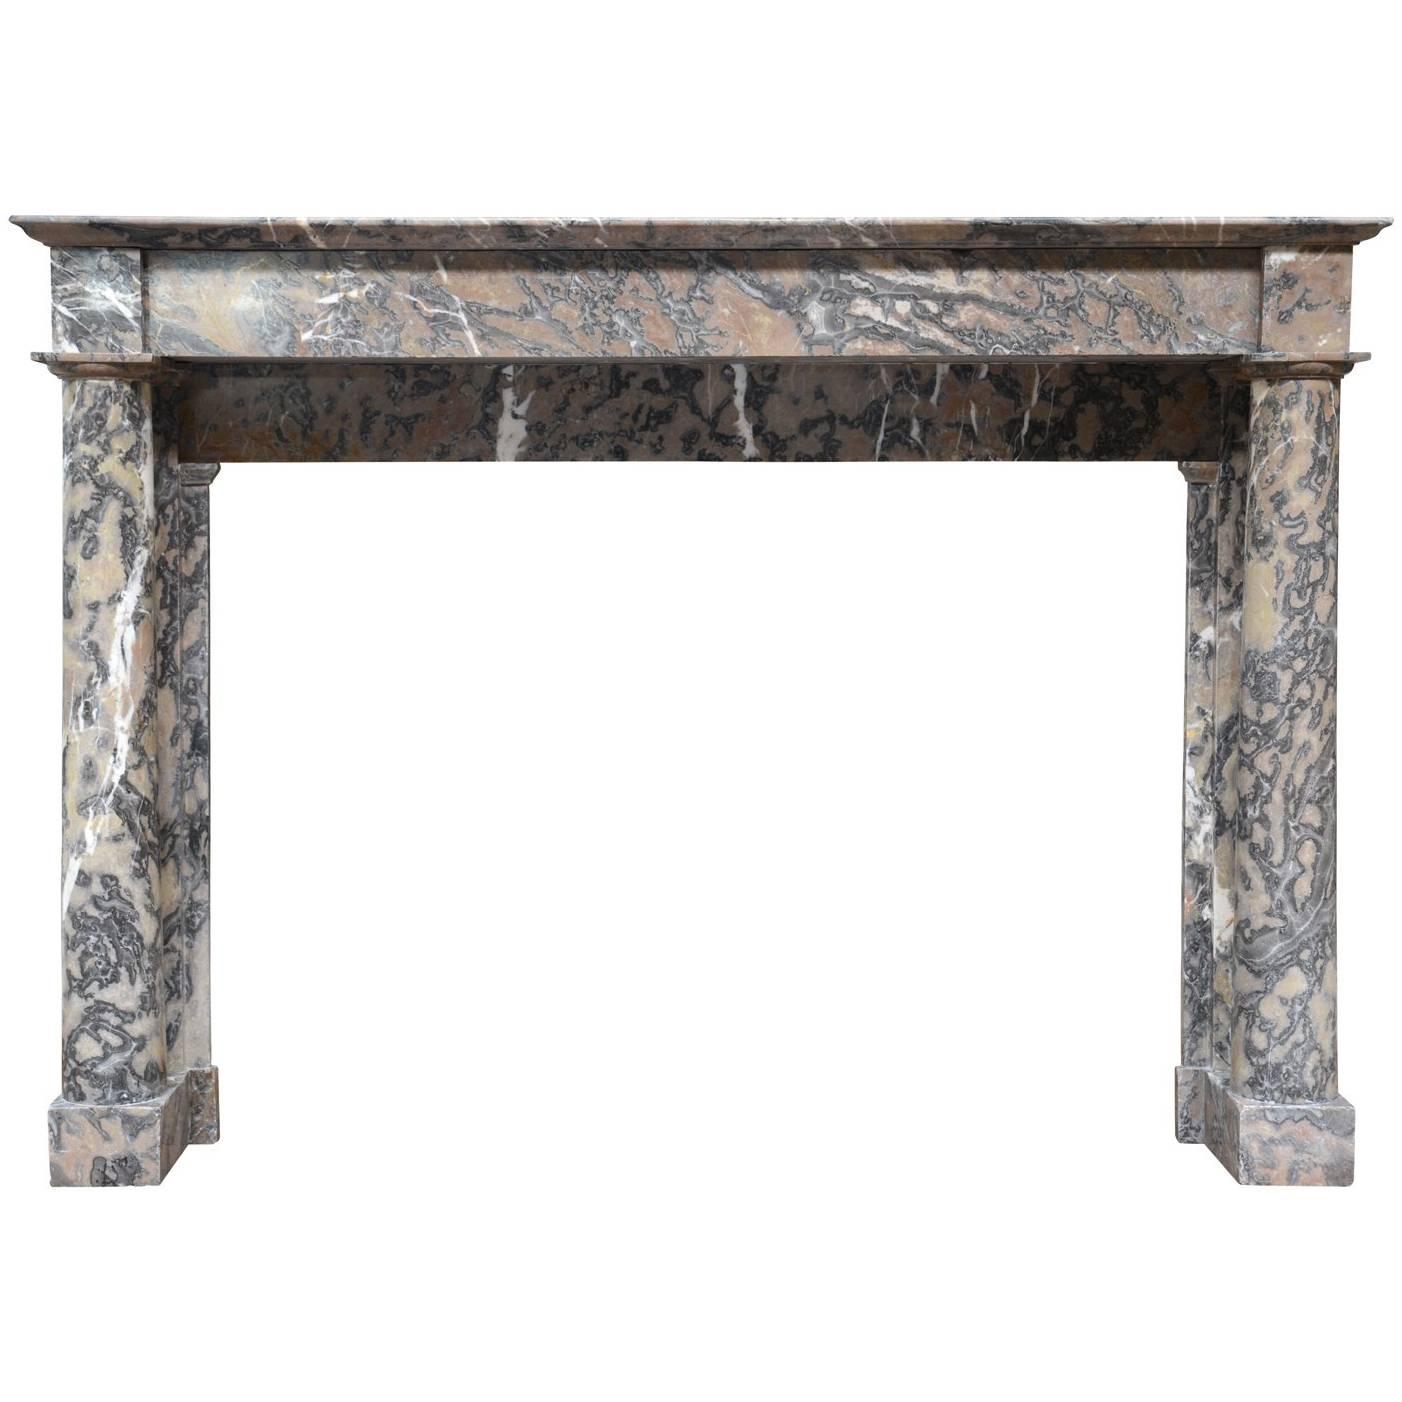 French Empire Period Caunes Grey Marble Fireplace, 19th Century For Sale